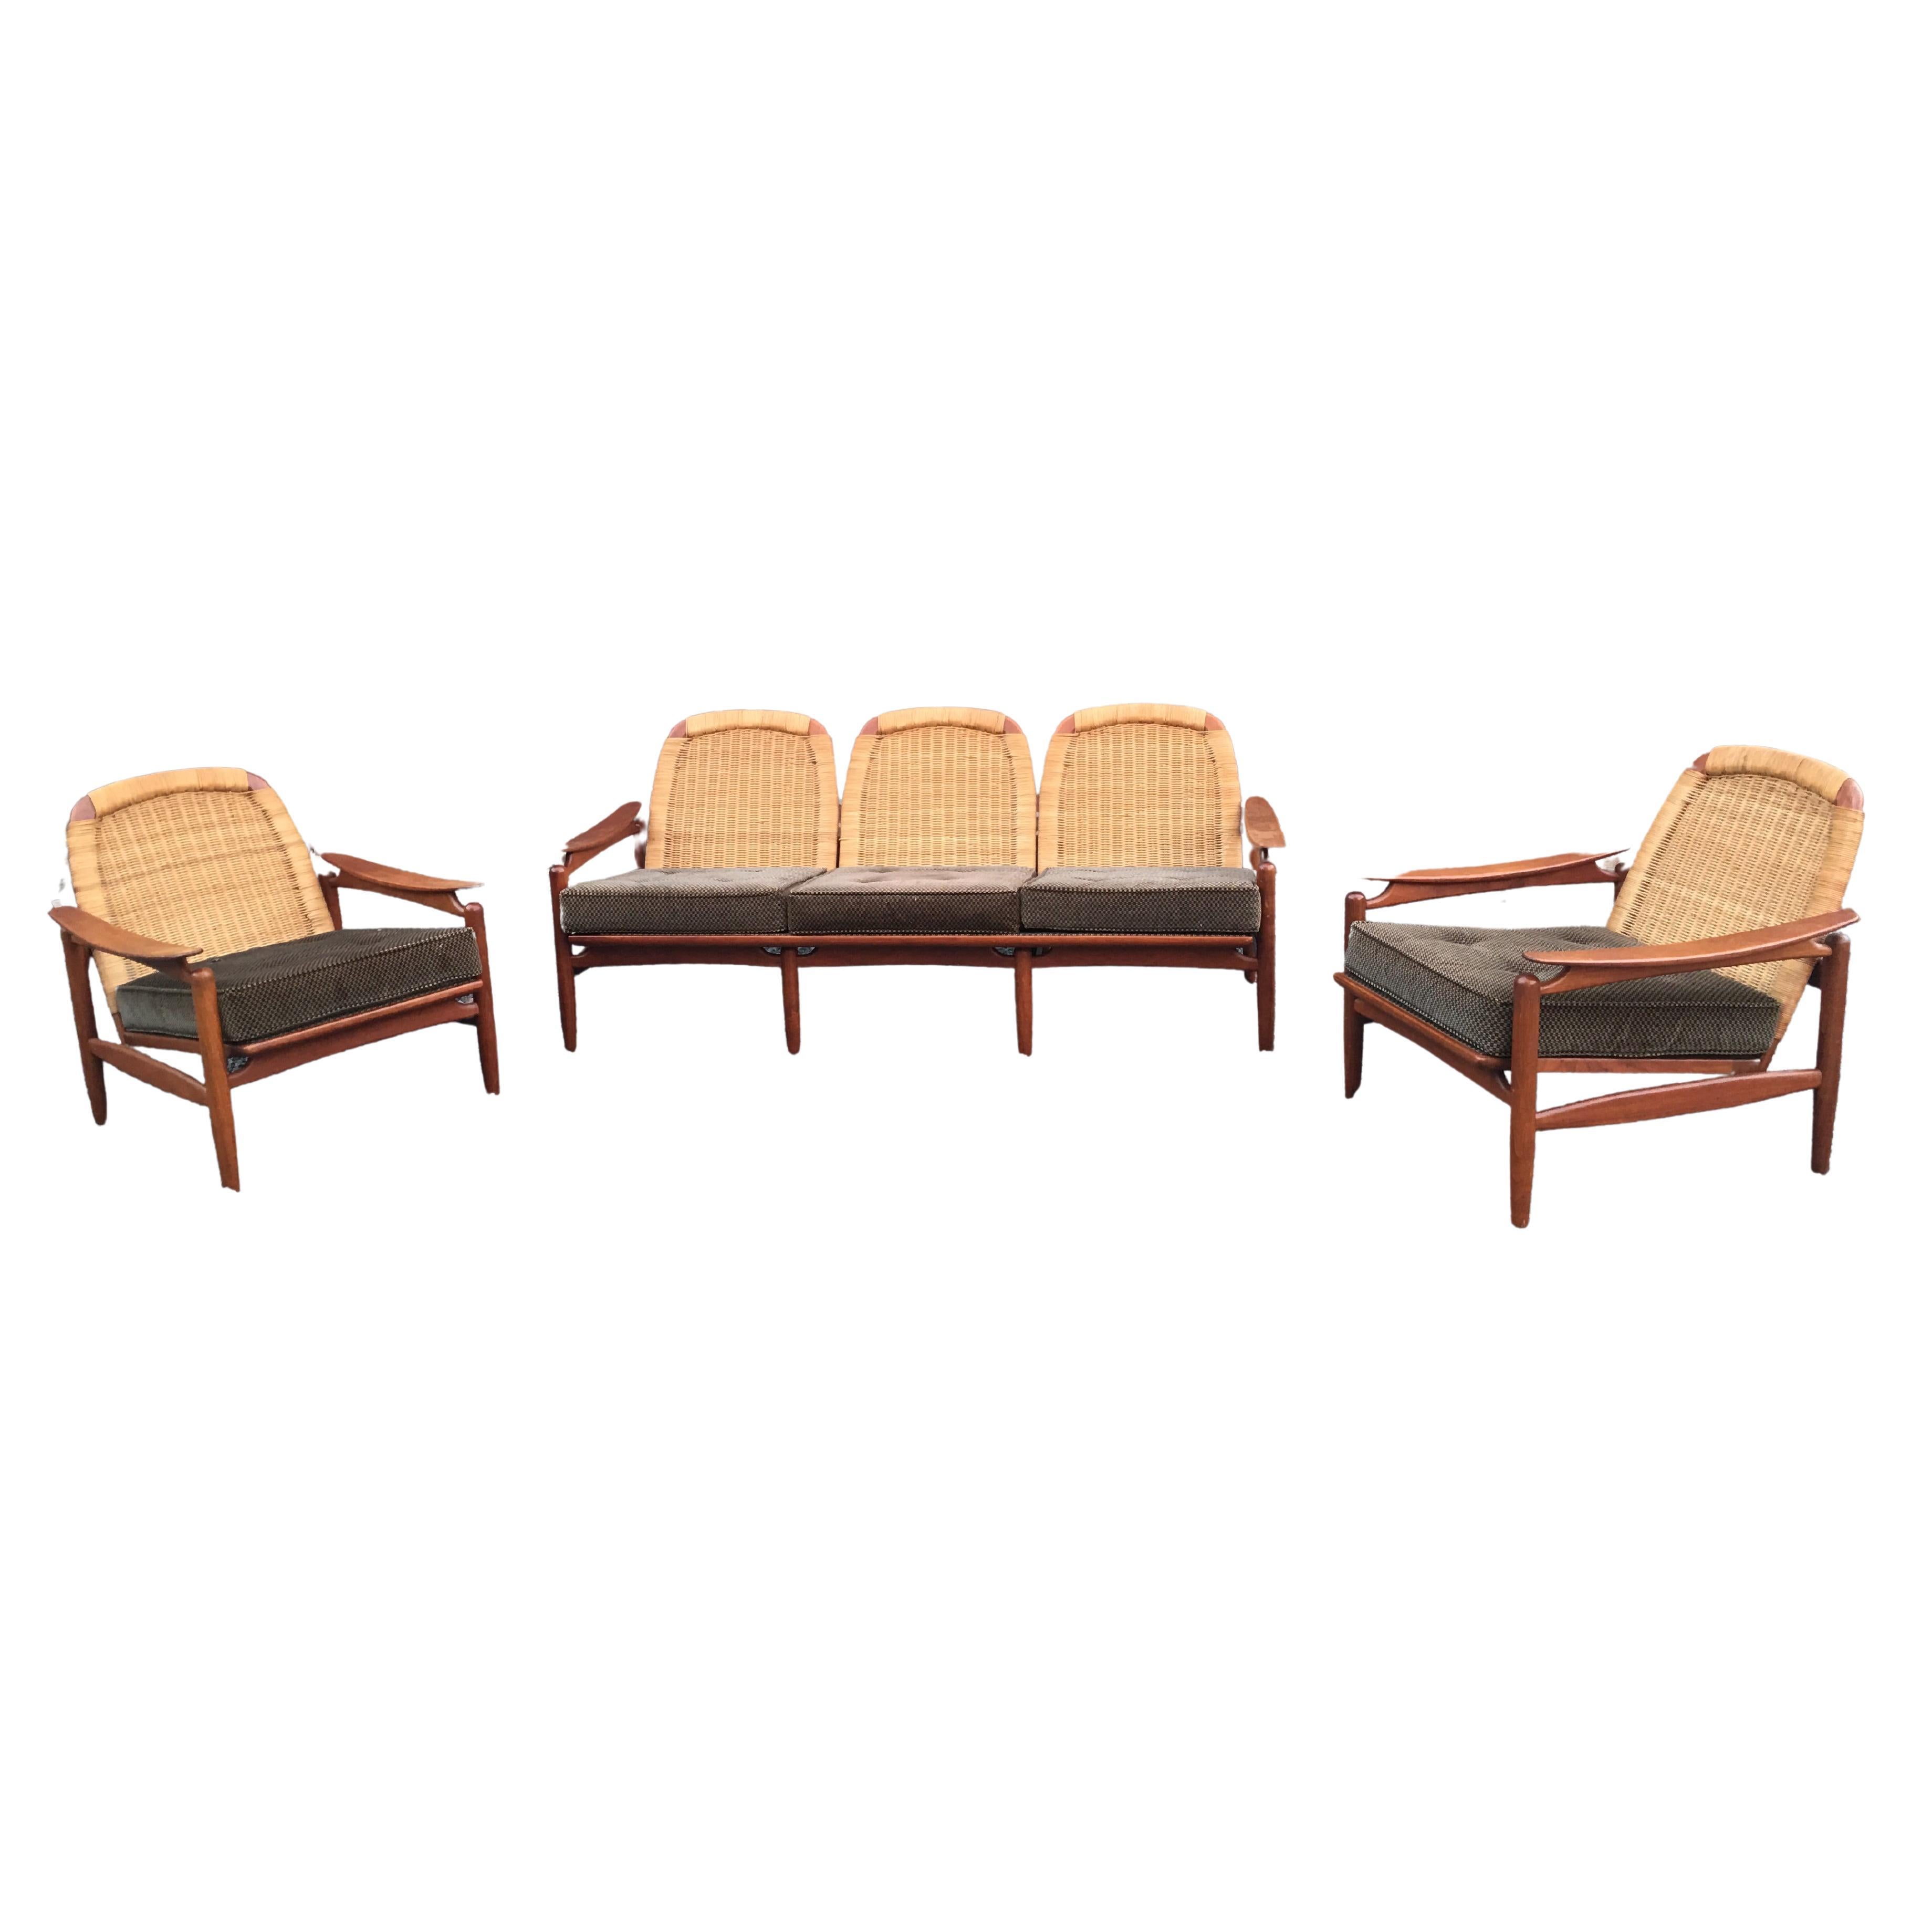 Scandinavian Style Living Room in Teak and Rattan, circa 1960-1970 For Sale